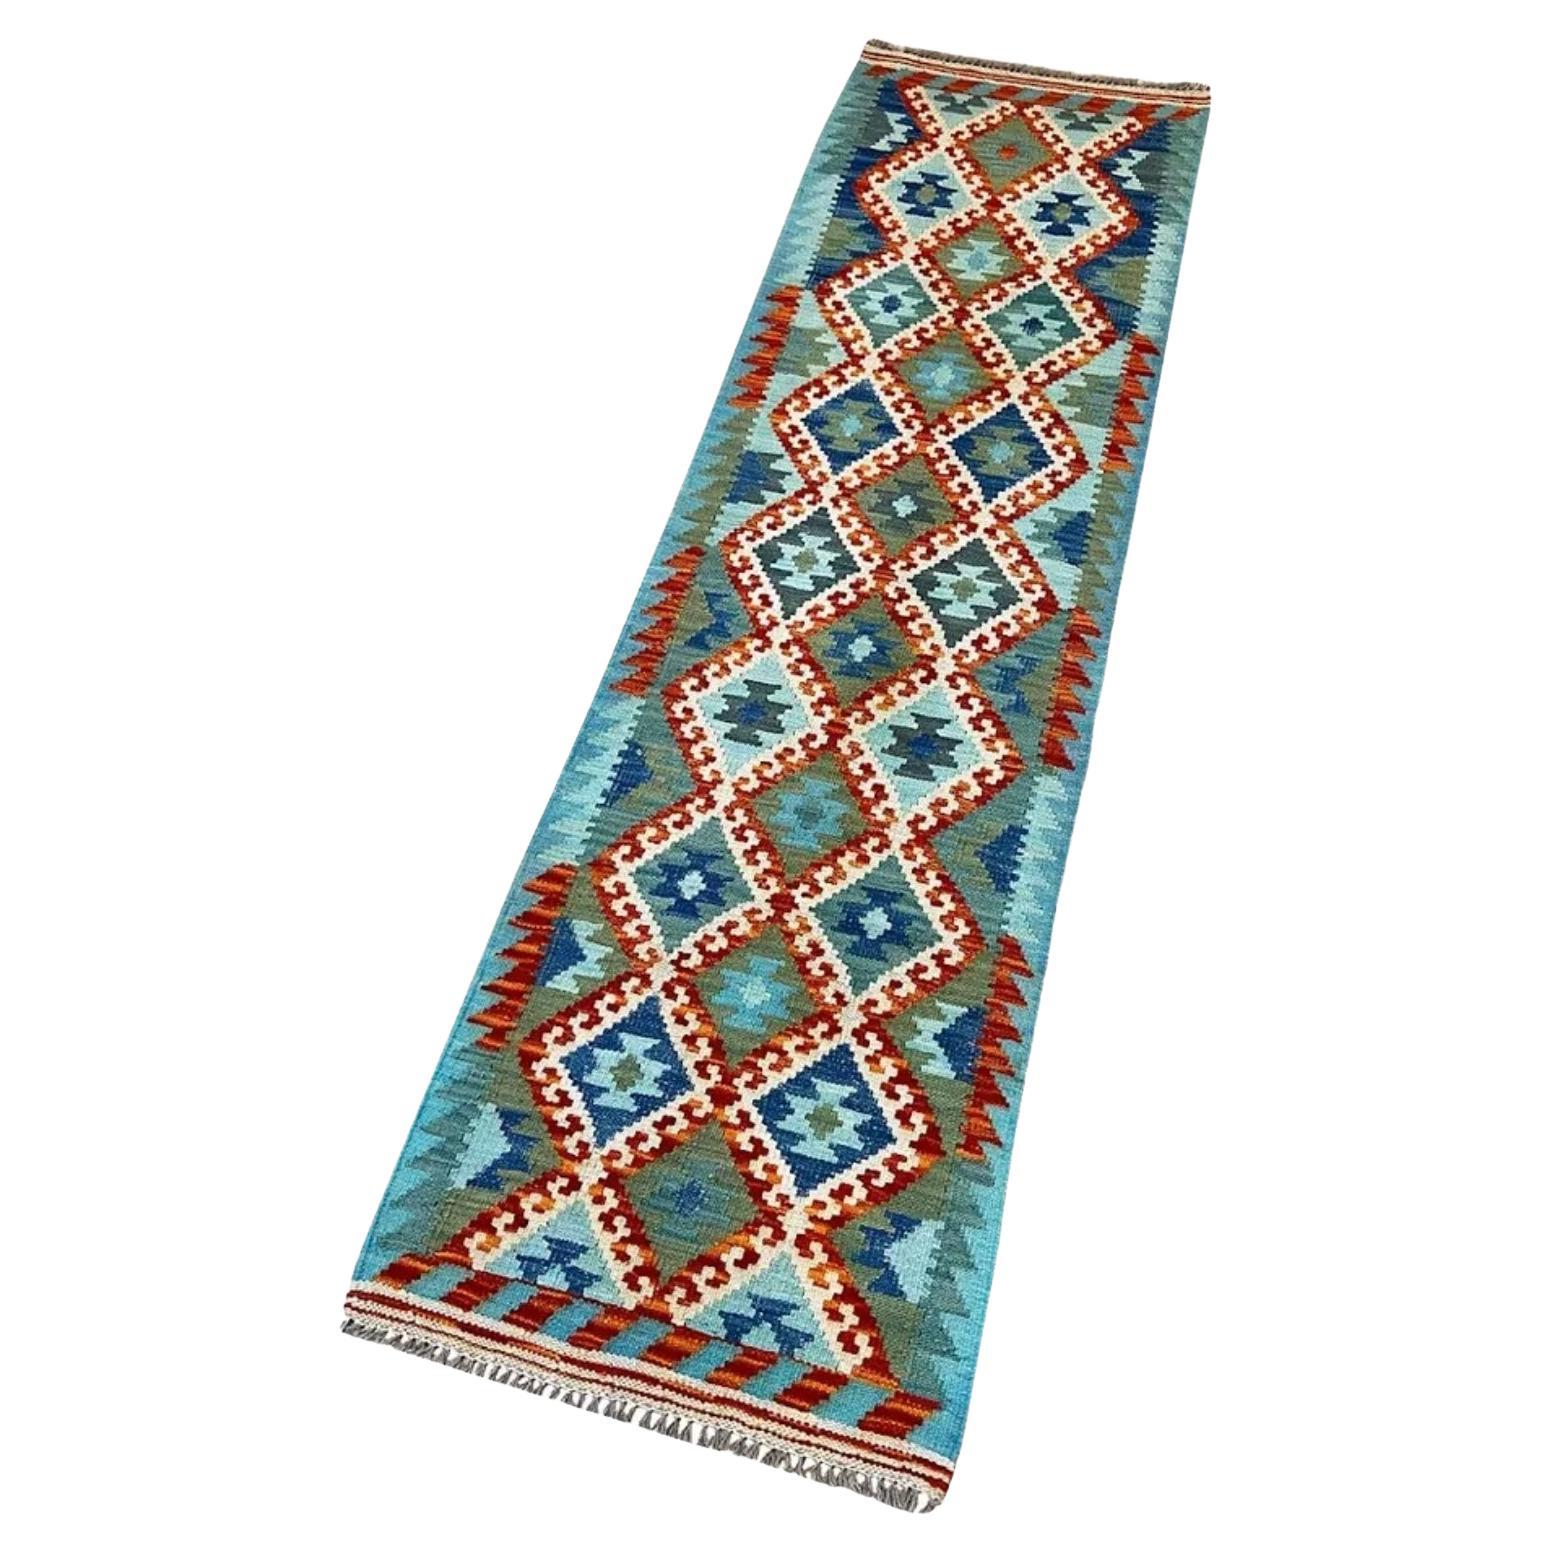 All Wool Colorful Kilim Runner 2' x 6' 7" For Sale